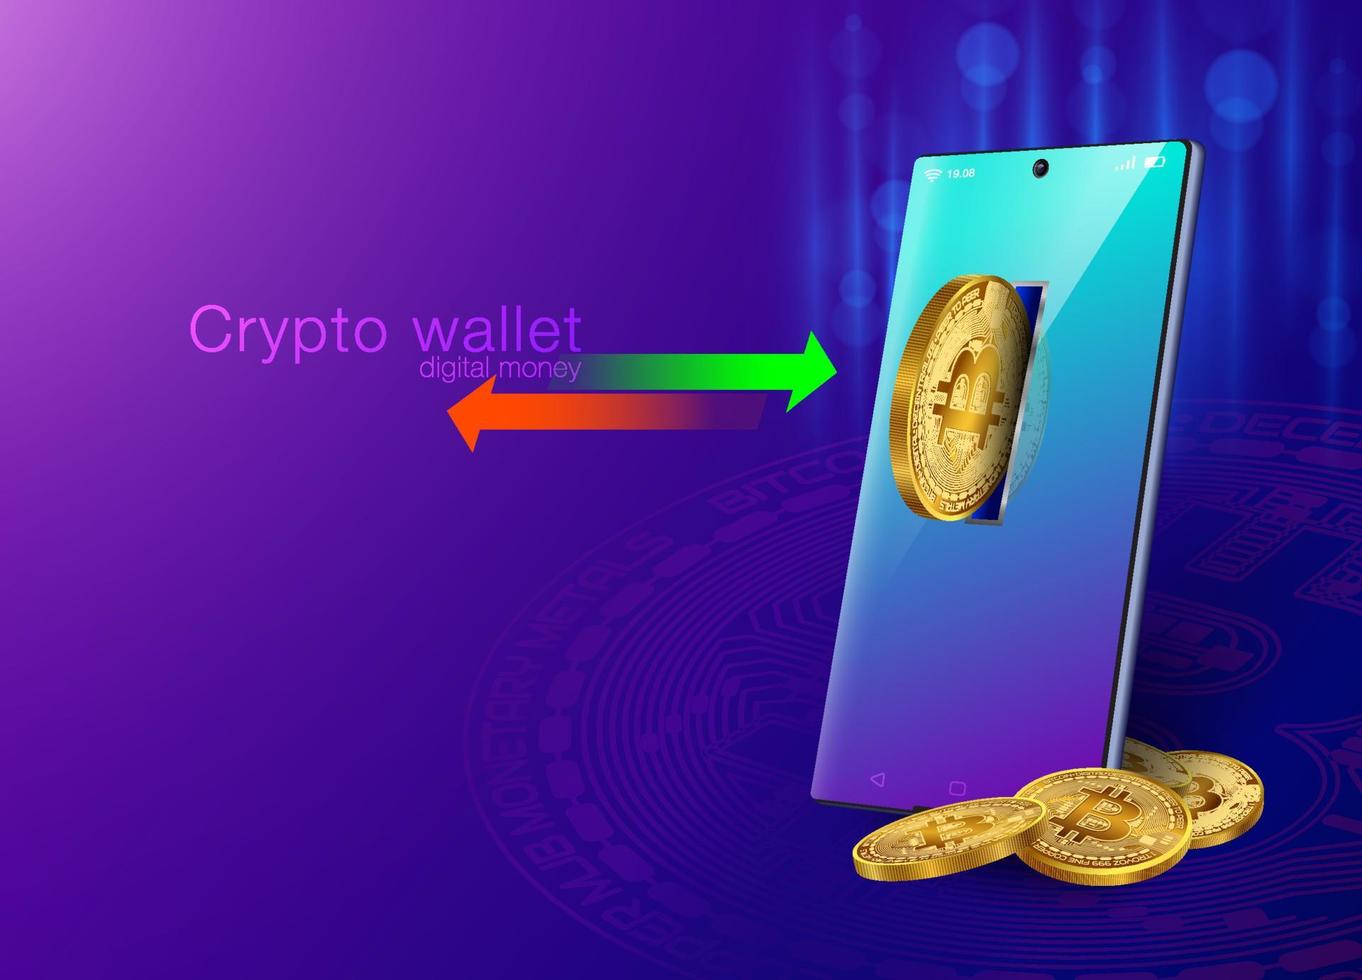 Crypto wallet, transfer money, deposit, withdraw digital money with smart wallet on smartphone. vector